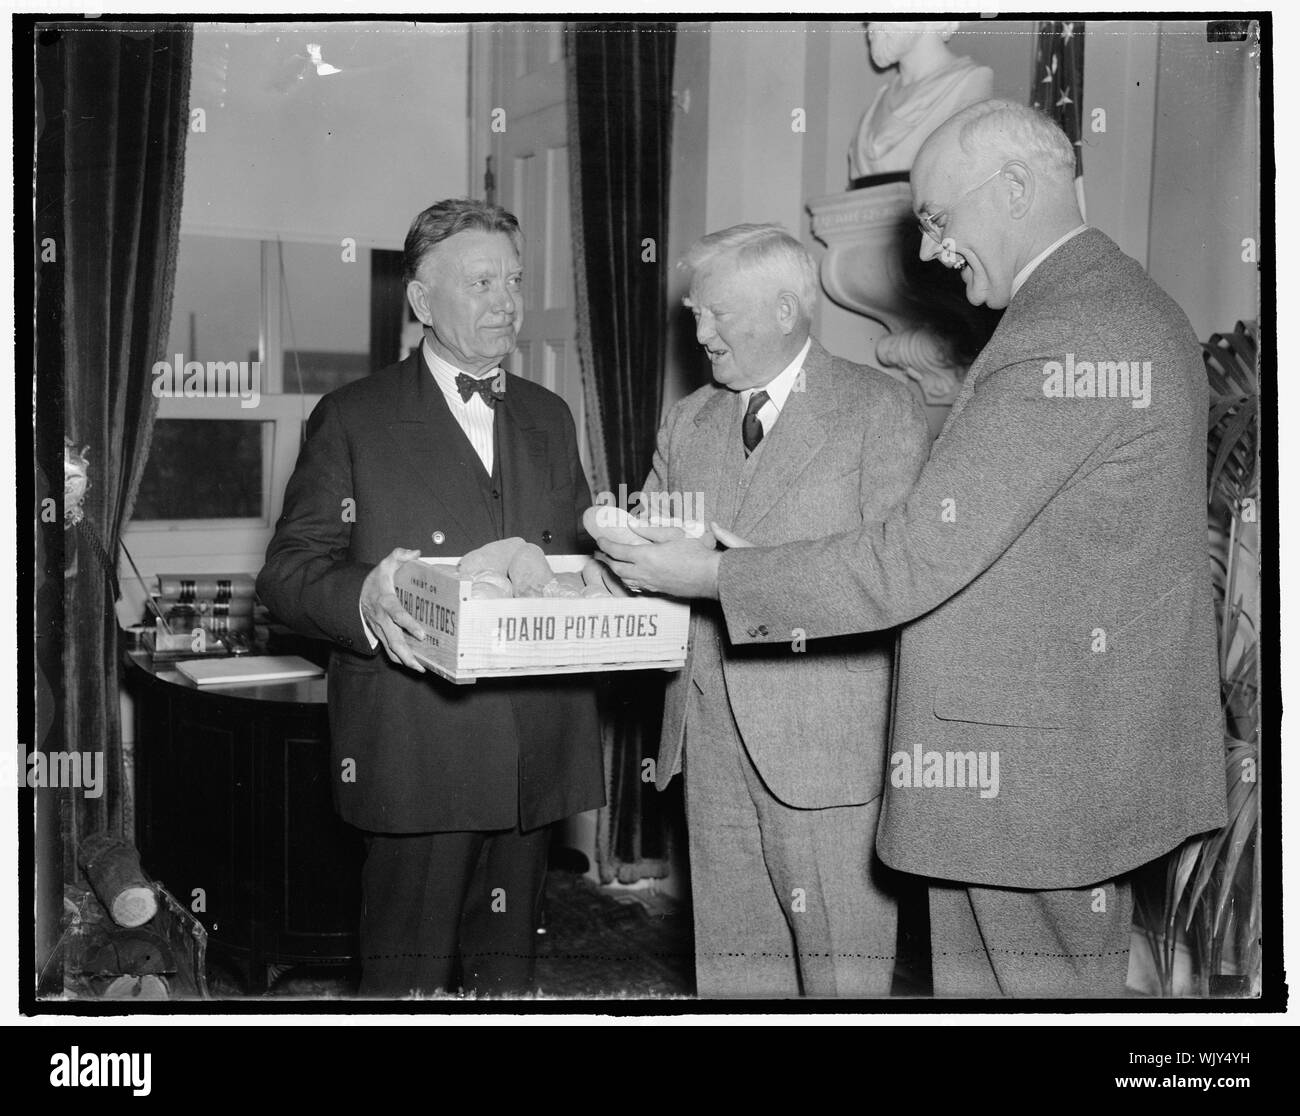 Idaho spuds presented to vice president. Washington, D.C., Dec. 6. A box of Idaho's choicest potatoes were presented today to Vice President John N. Garnger by Senators William E. Borah, (left) and James P. Pope, both from the famous potato-growing state. The presentation was the signal for challenge issued by the Maine Congressional Delegation to the Idaho Solons for a potato eating contest which will be staged in the House Restaurant tomorrow to test the relative merits of the spuds from the two states. 12/6/37 Stock Photo